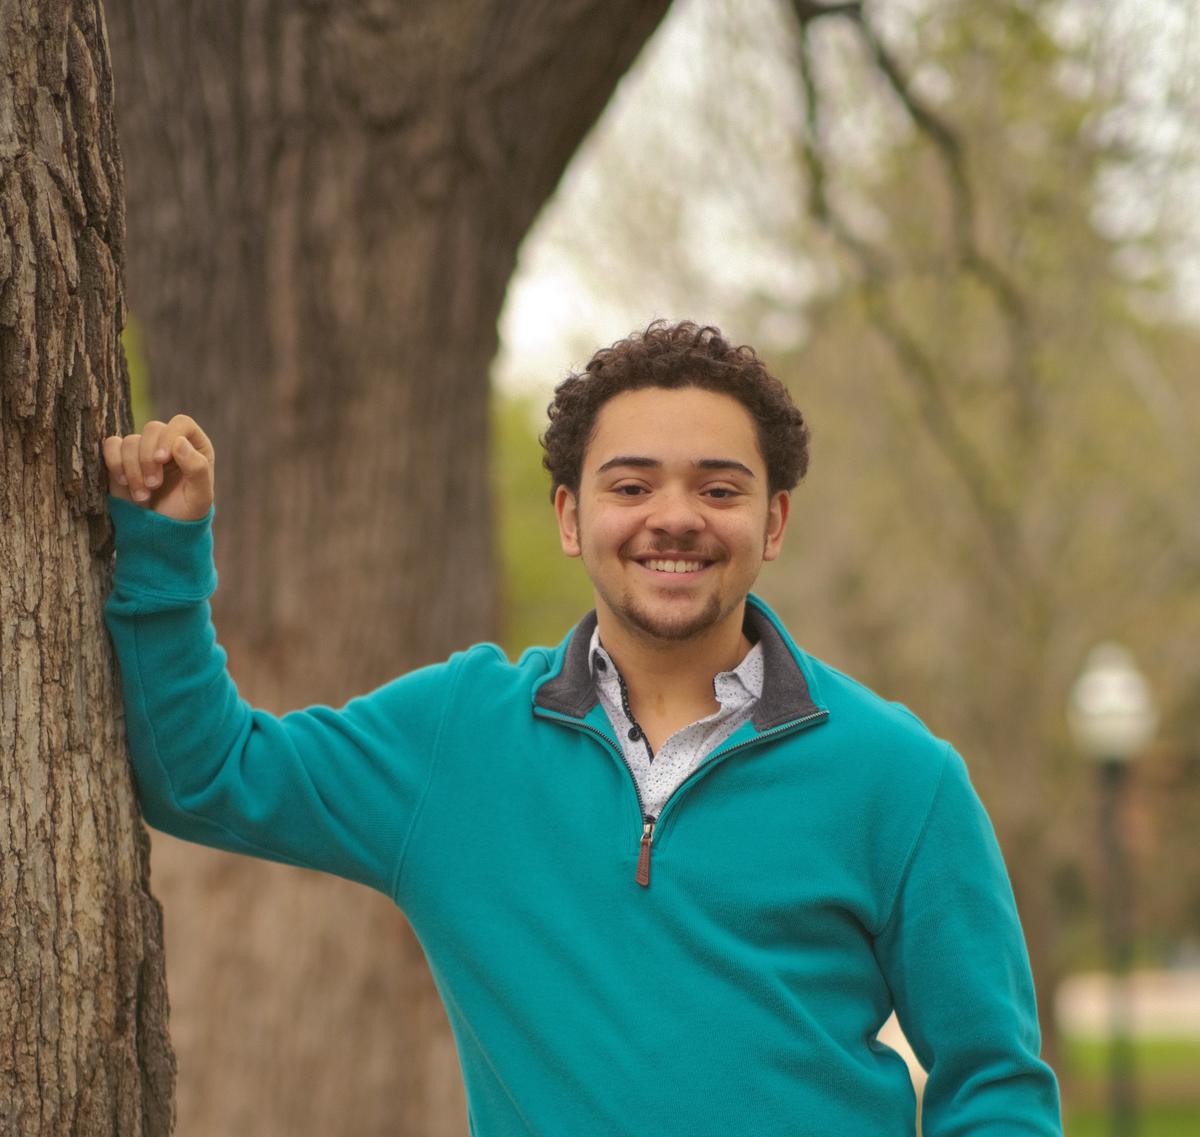 Cameron Borner smiles and leans against a tree.